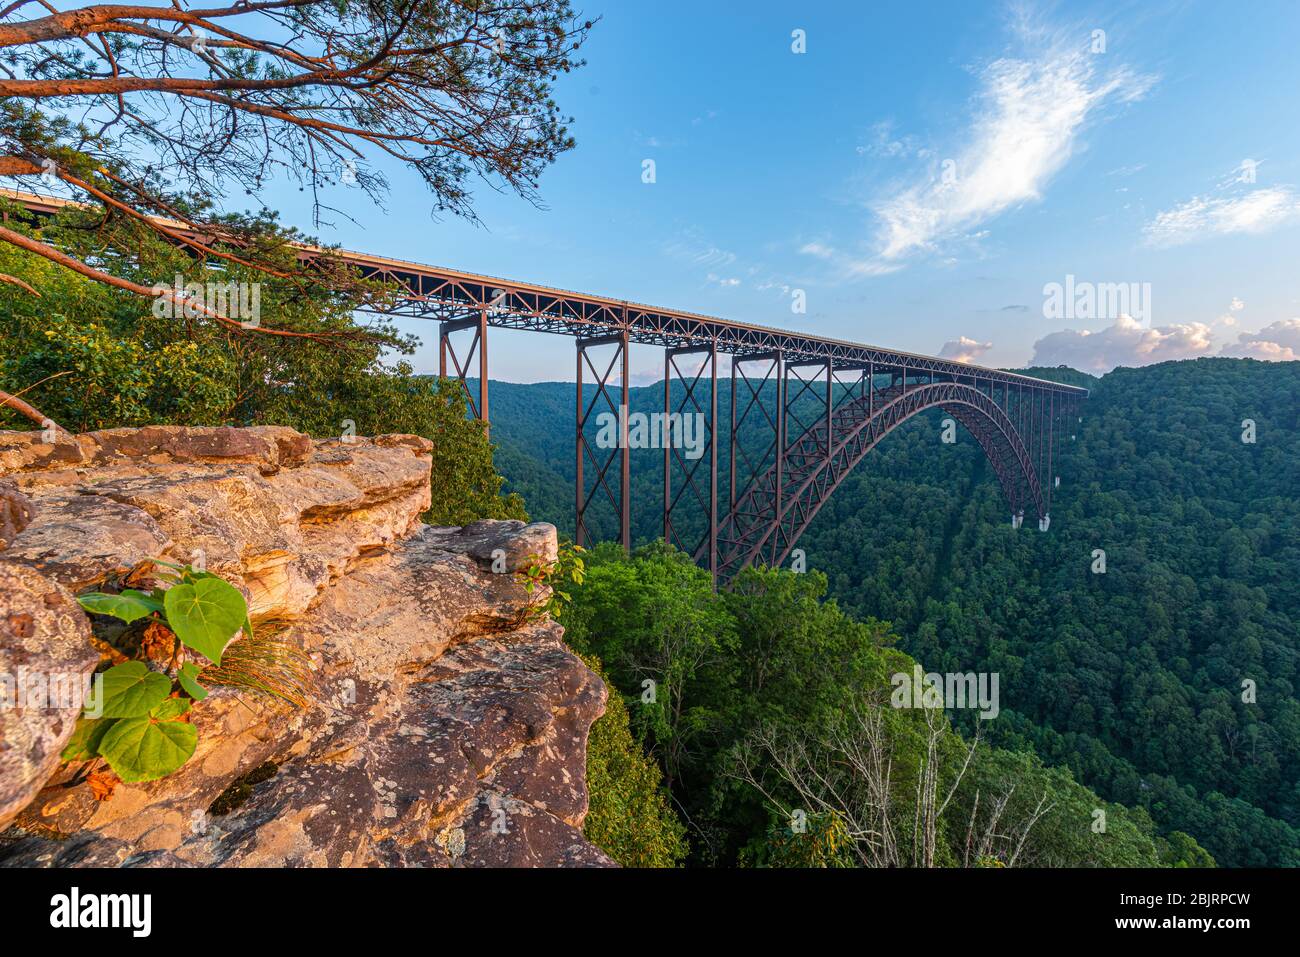 The large steel arch bridge of the New River Gorge spans the canyon below a blue sky viewed from the rock ledge of a climbing area. Stock Photo